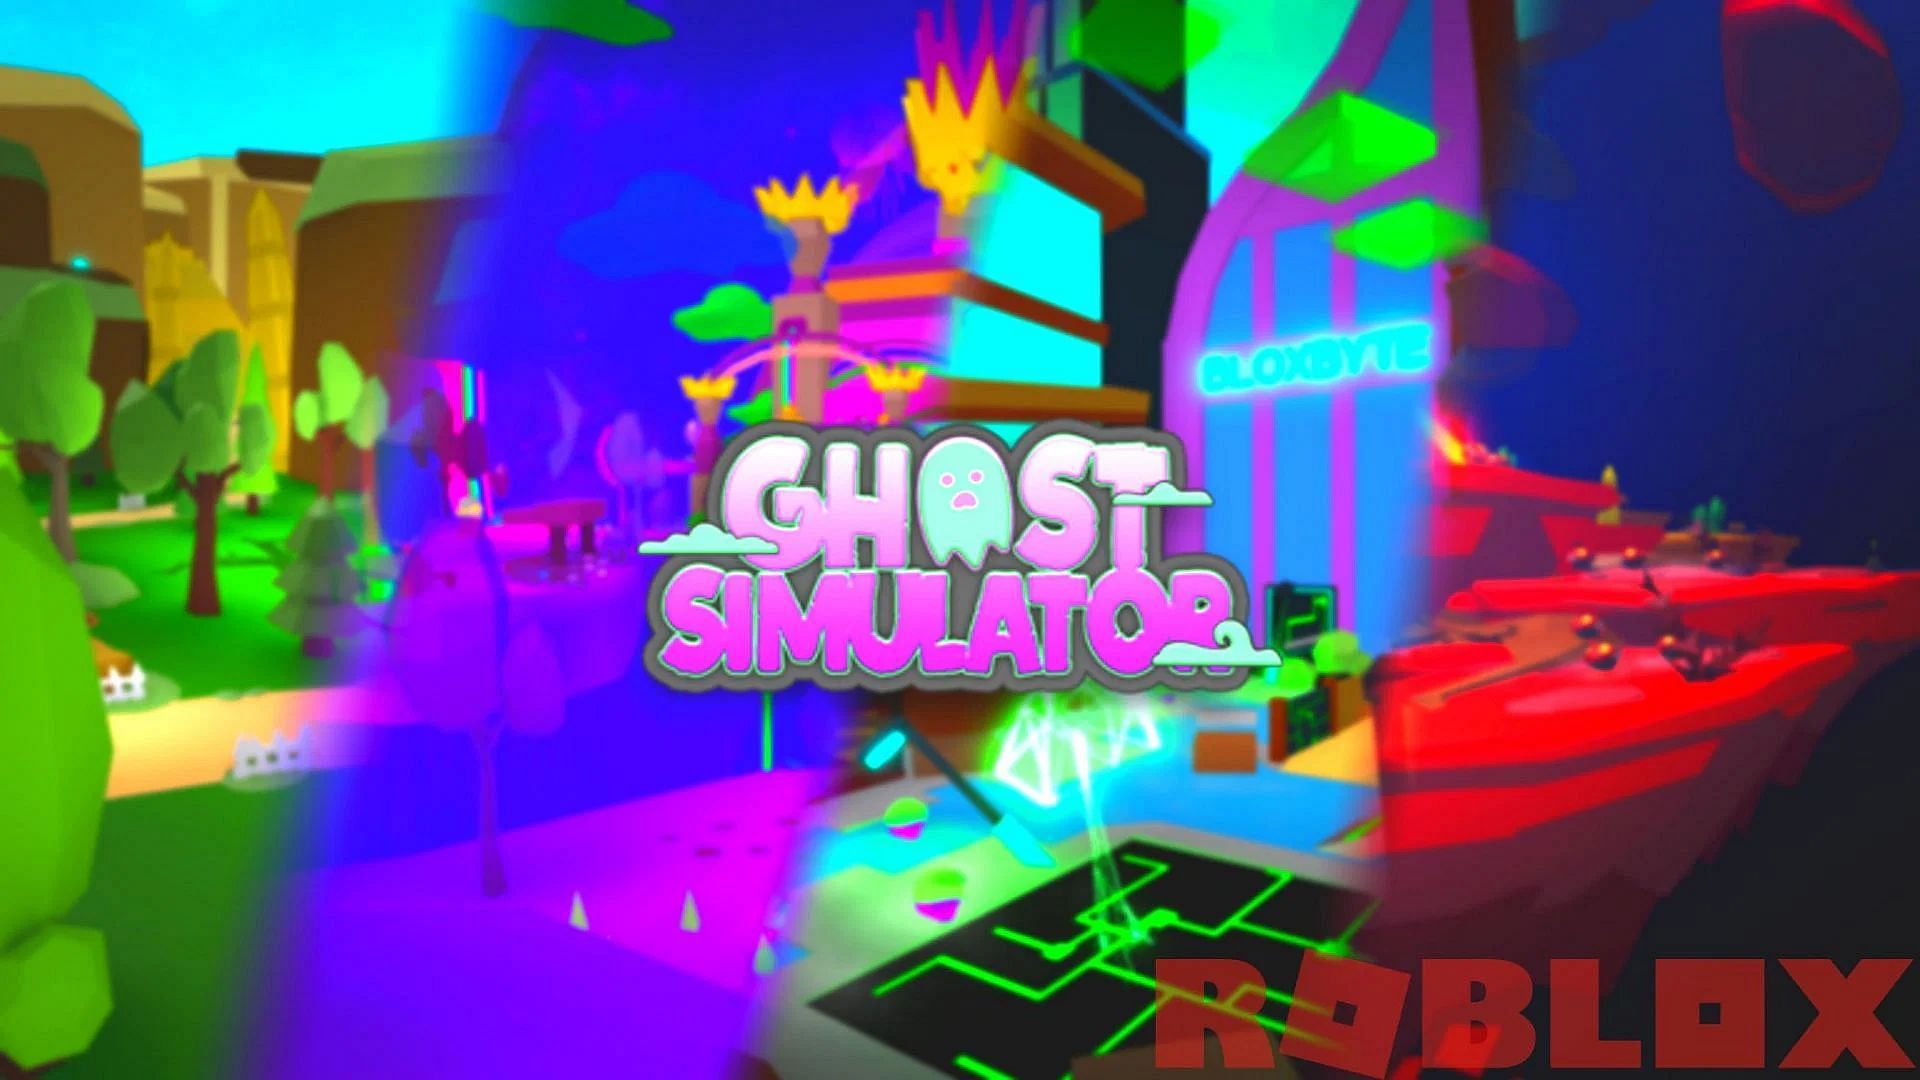 Ghost Simulator codes in Roblox: Free Pets, keys, and more (July 2022)